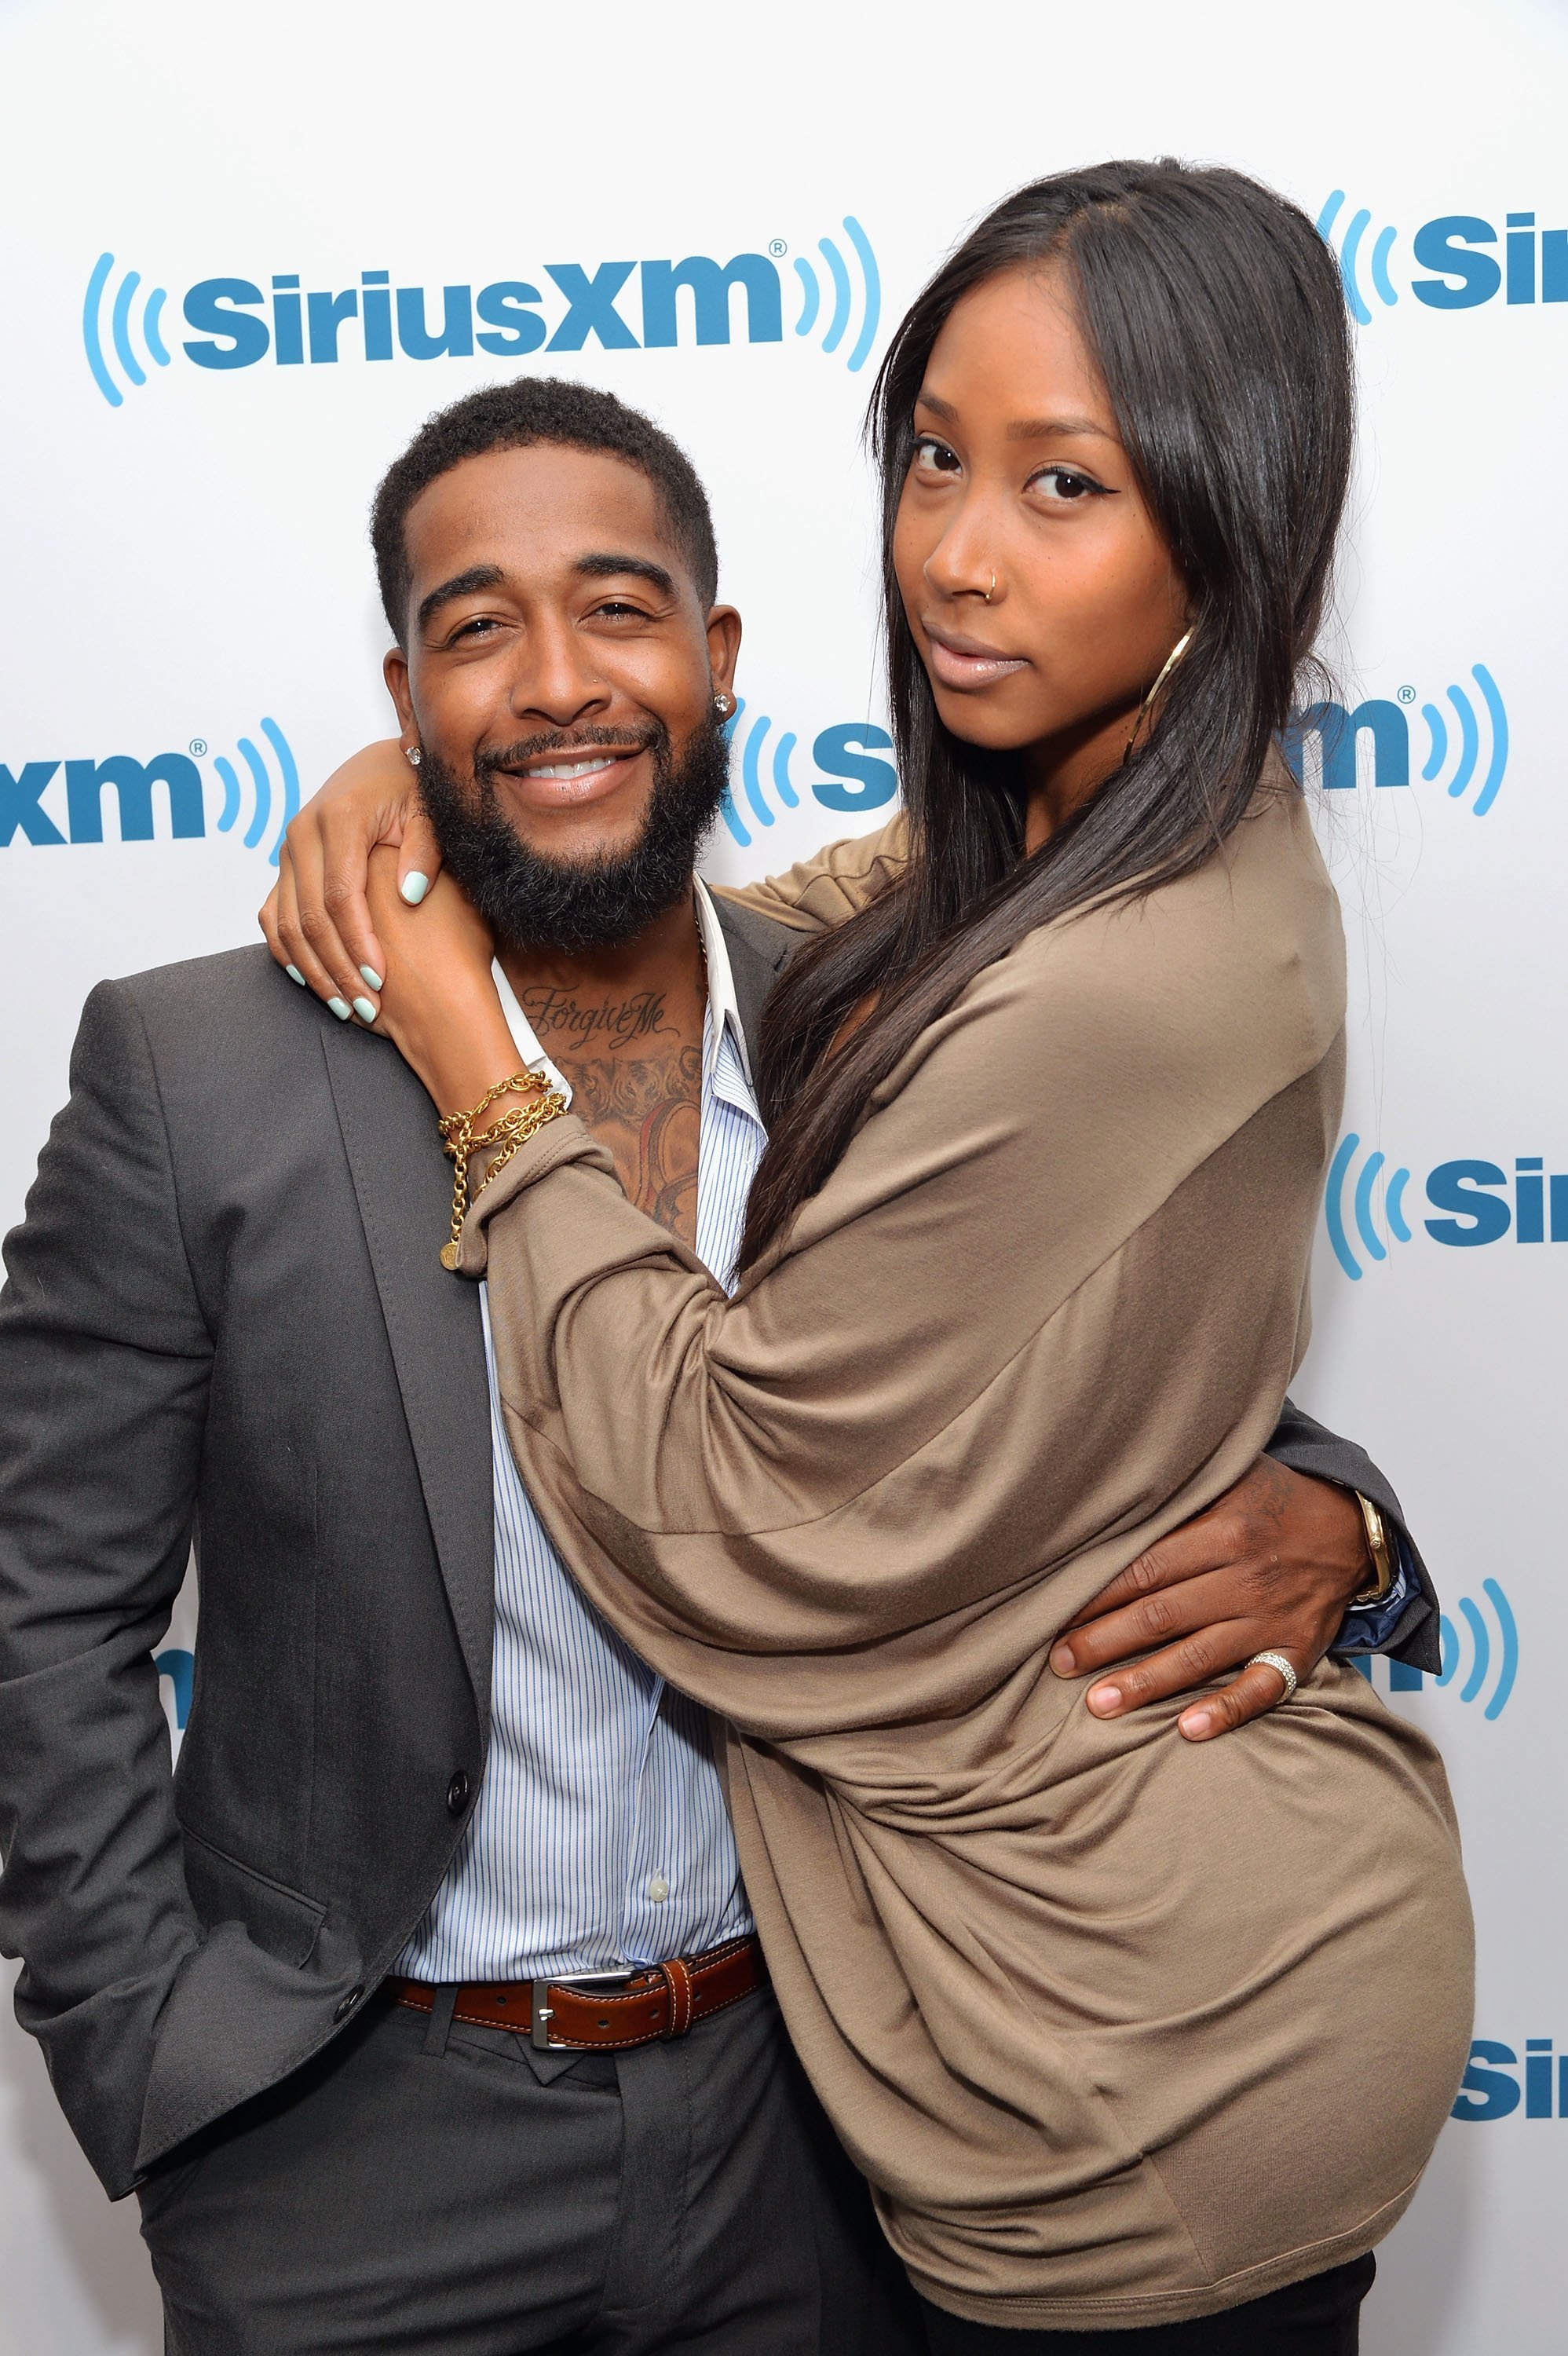 Omarion & Apryl Jones at the SiriusXM Studio in May 2014. | Photo: Getty Images